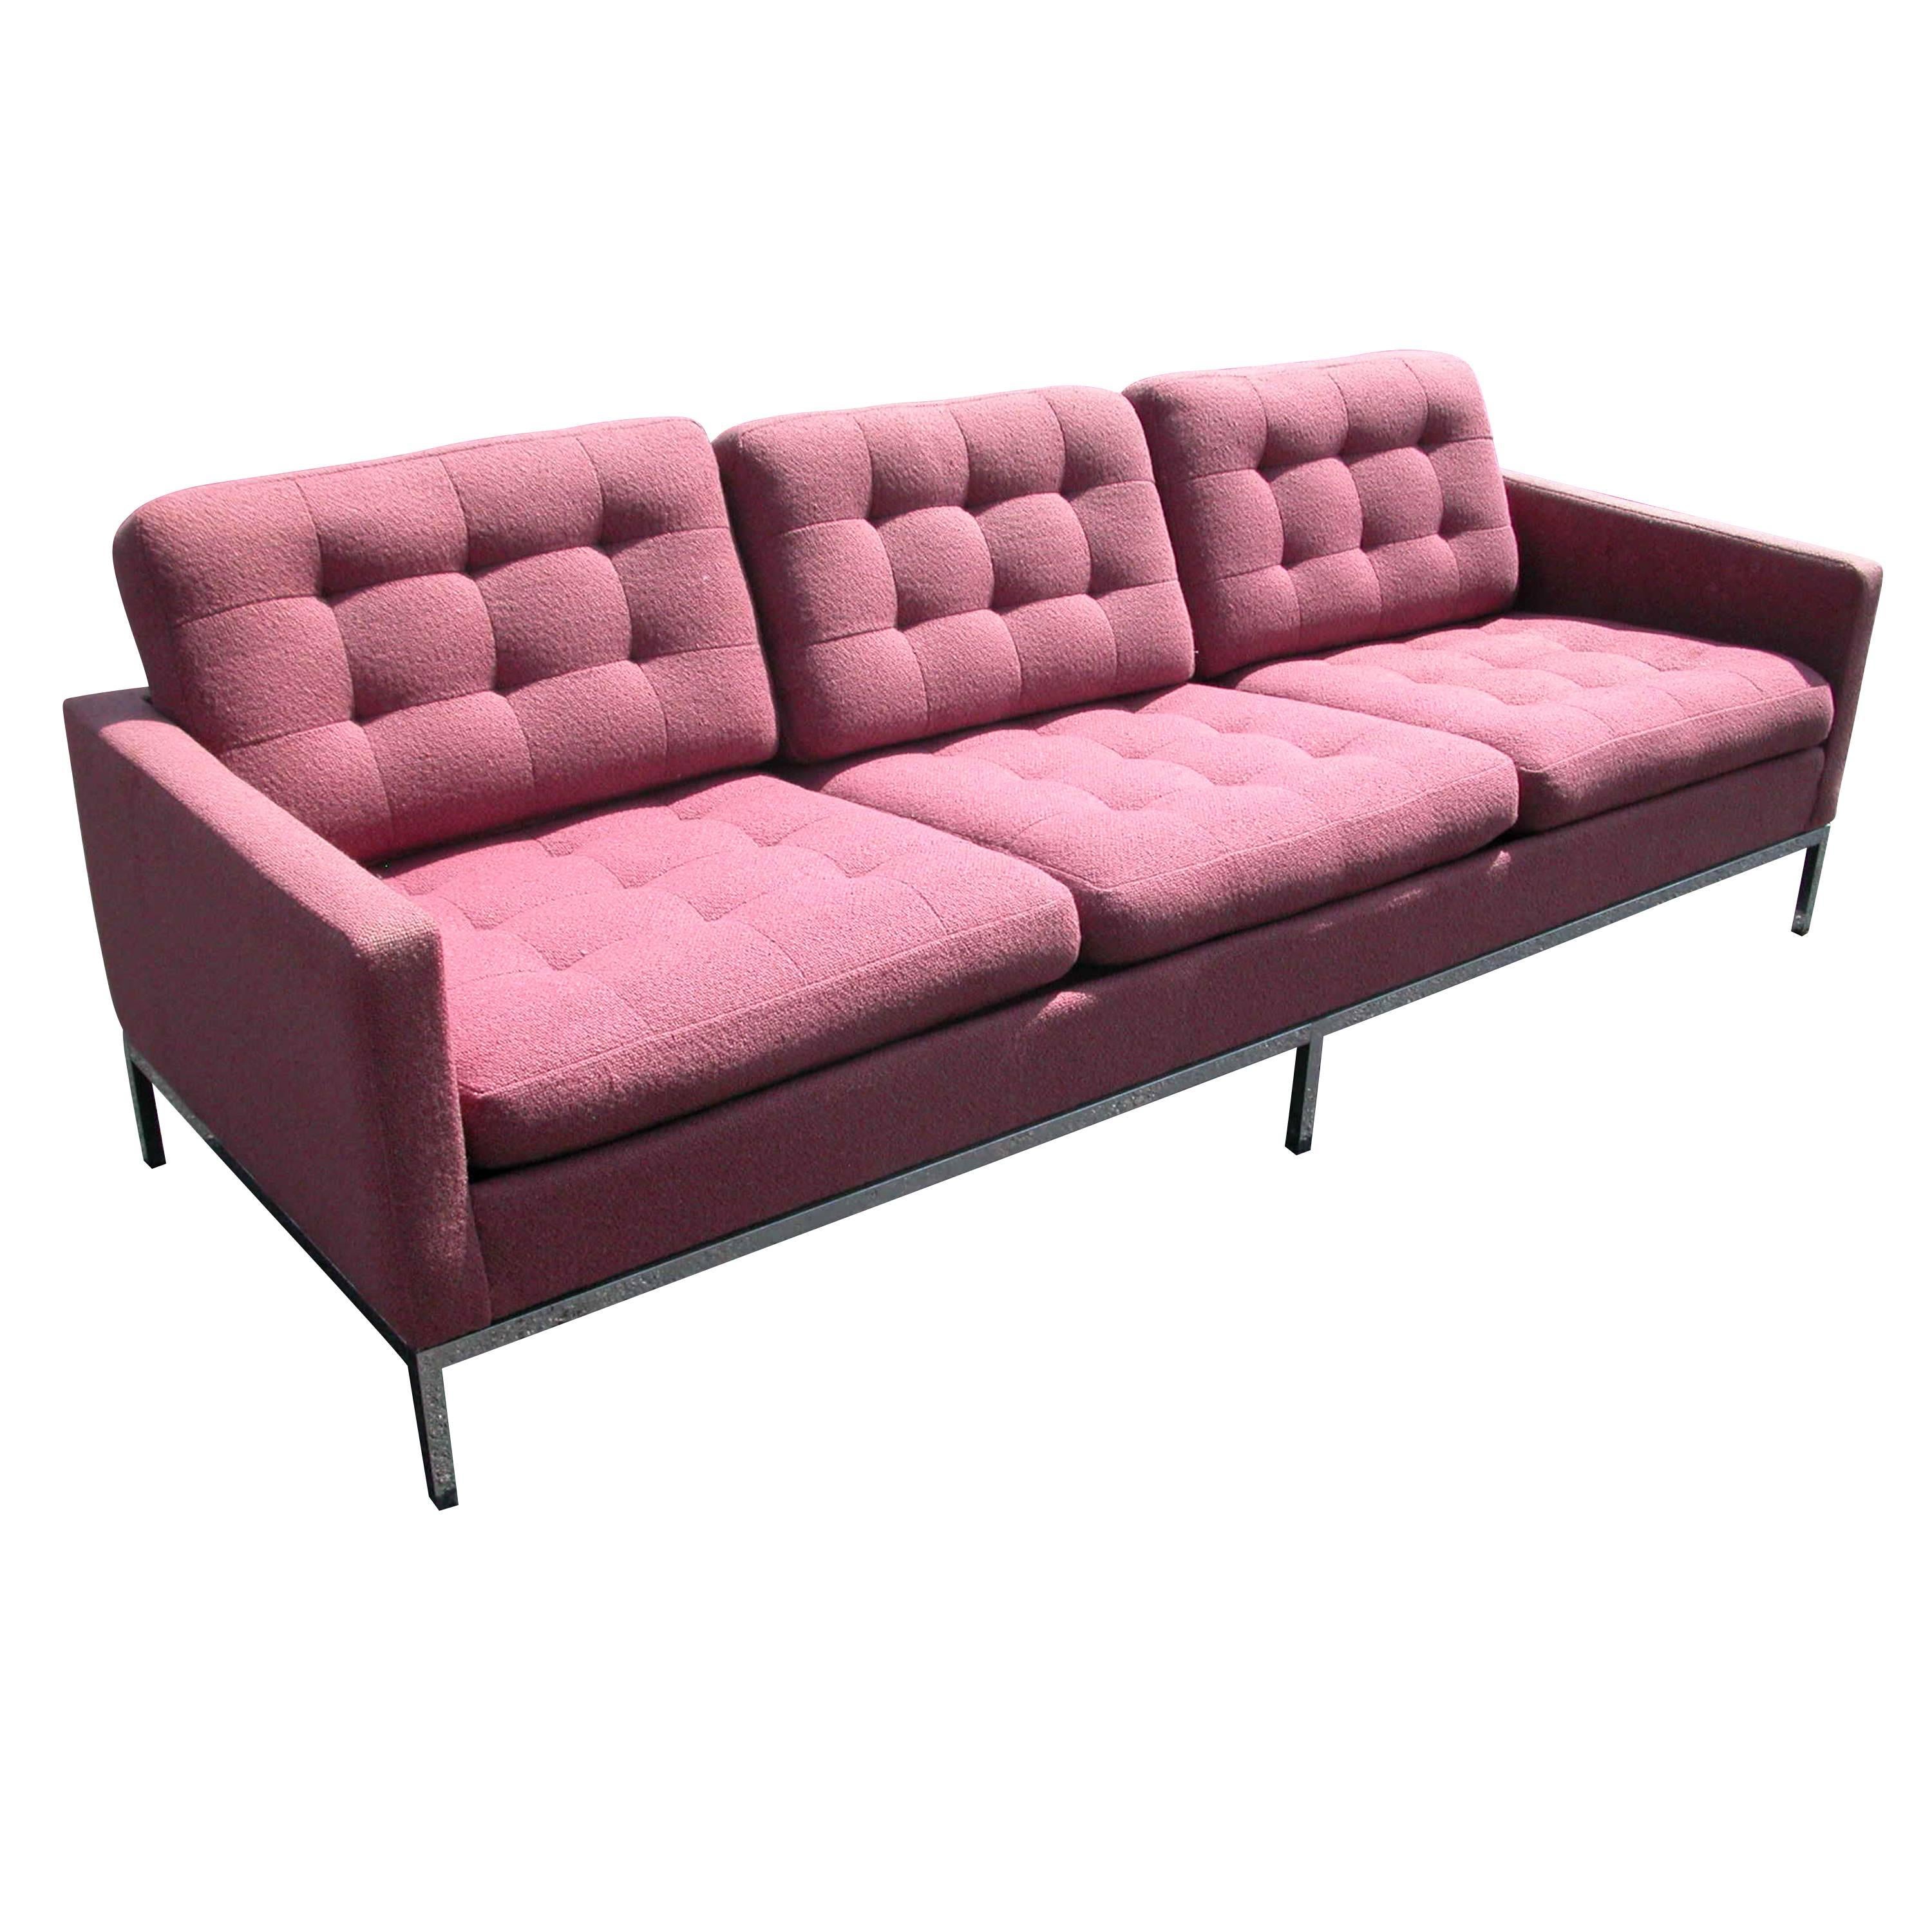 90in Vintage Mid-Century Knoll Three-Seat Sofa For Sale